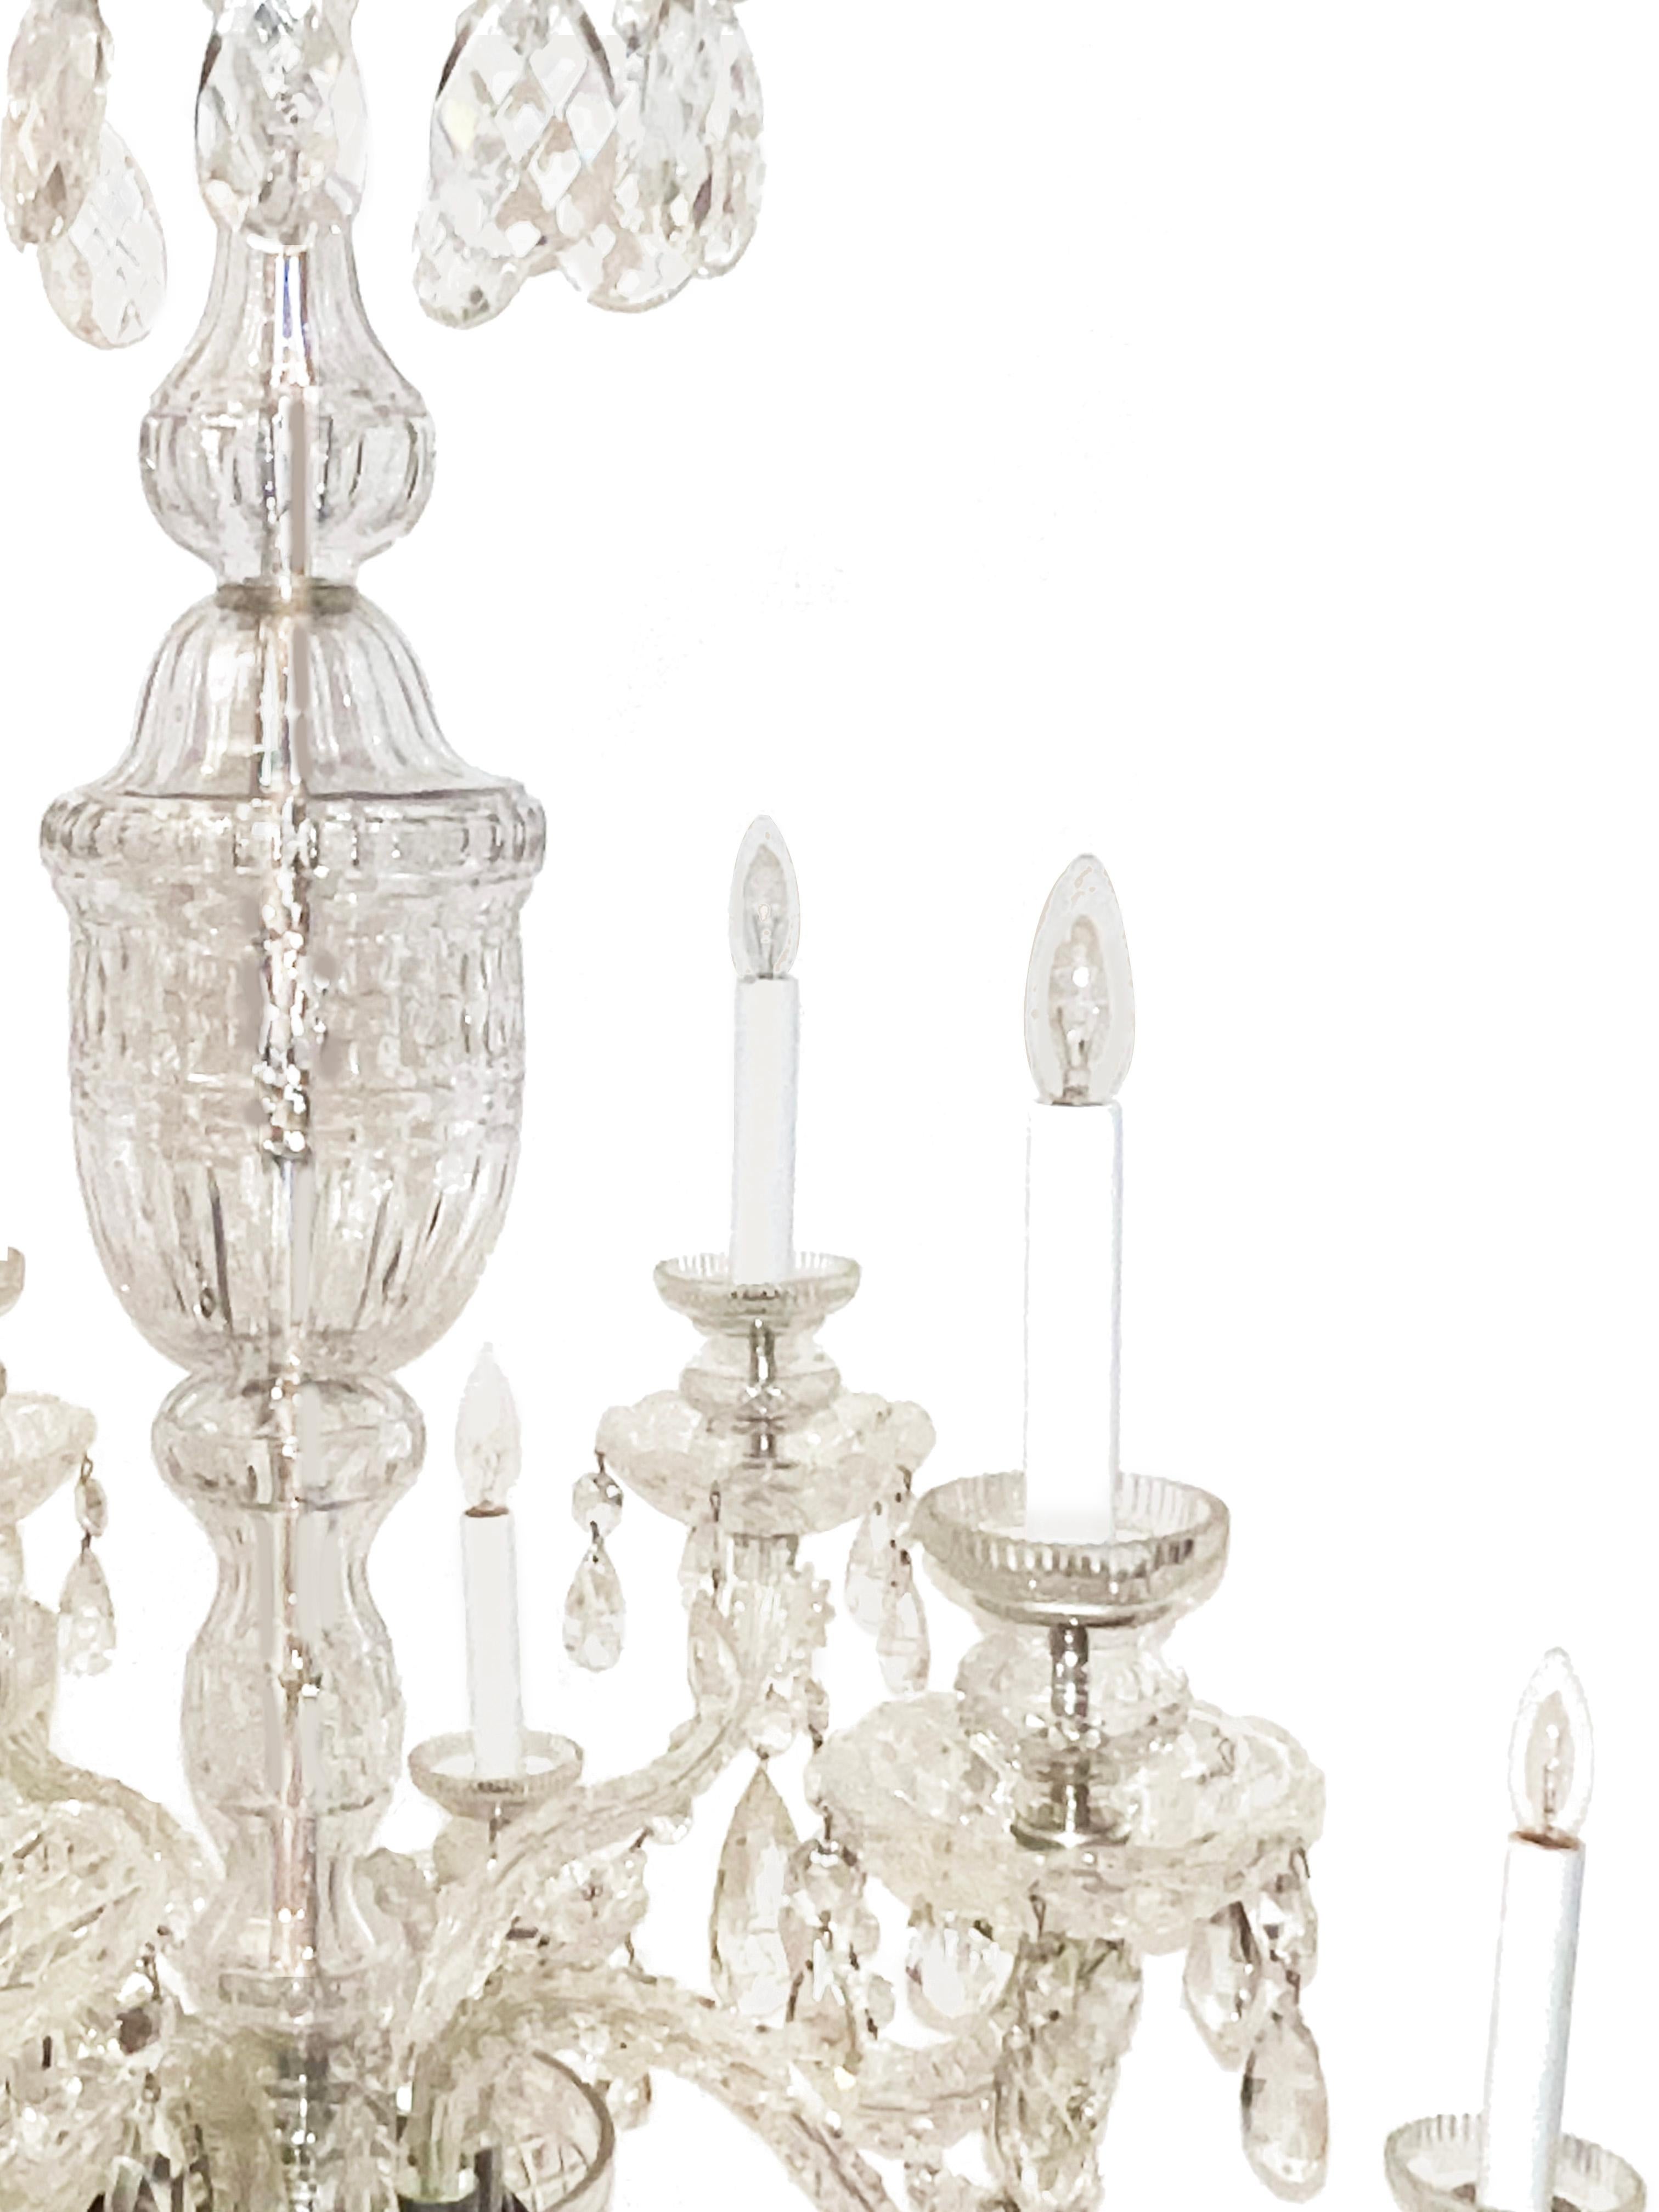 An English George II style 10 light leaded glass chandelier. The center shaft with baluster and vase shaped elements covering the center rod issuing 12 arms of staggered height. The candle cups and umbrella shaped top draped with teardrop shaped